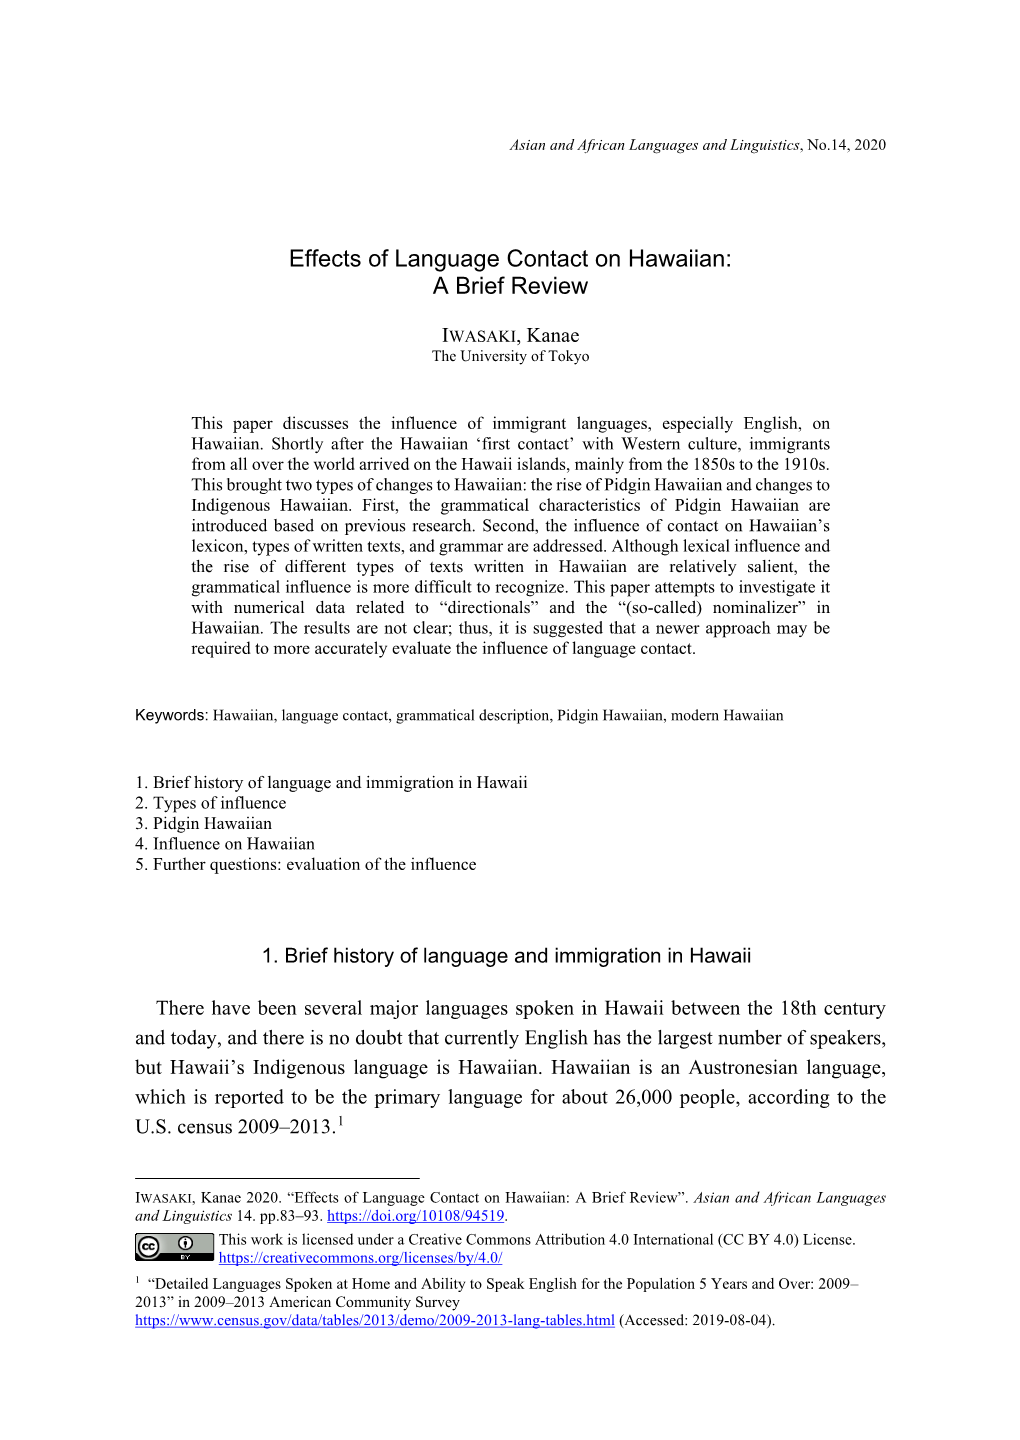 Effects of Language Contact on Hawaiian: a Brief Review